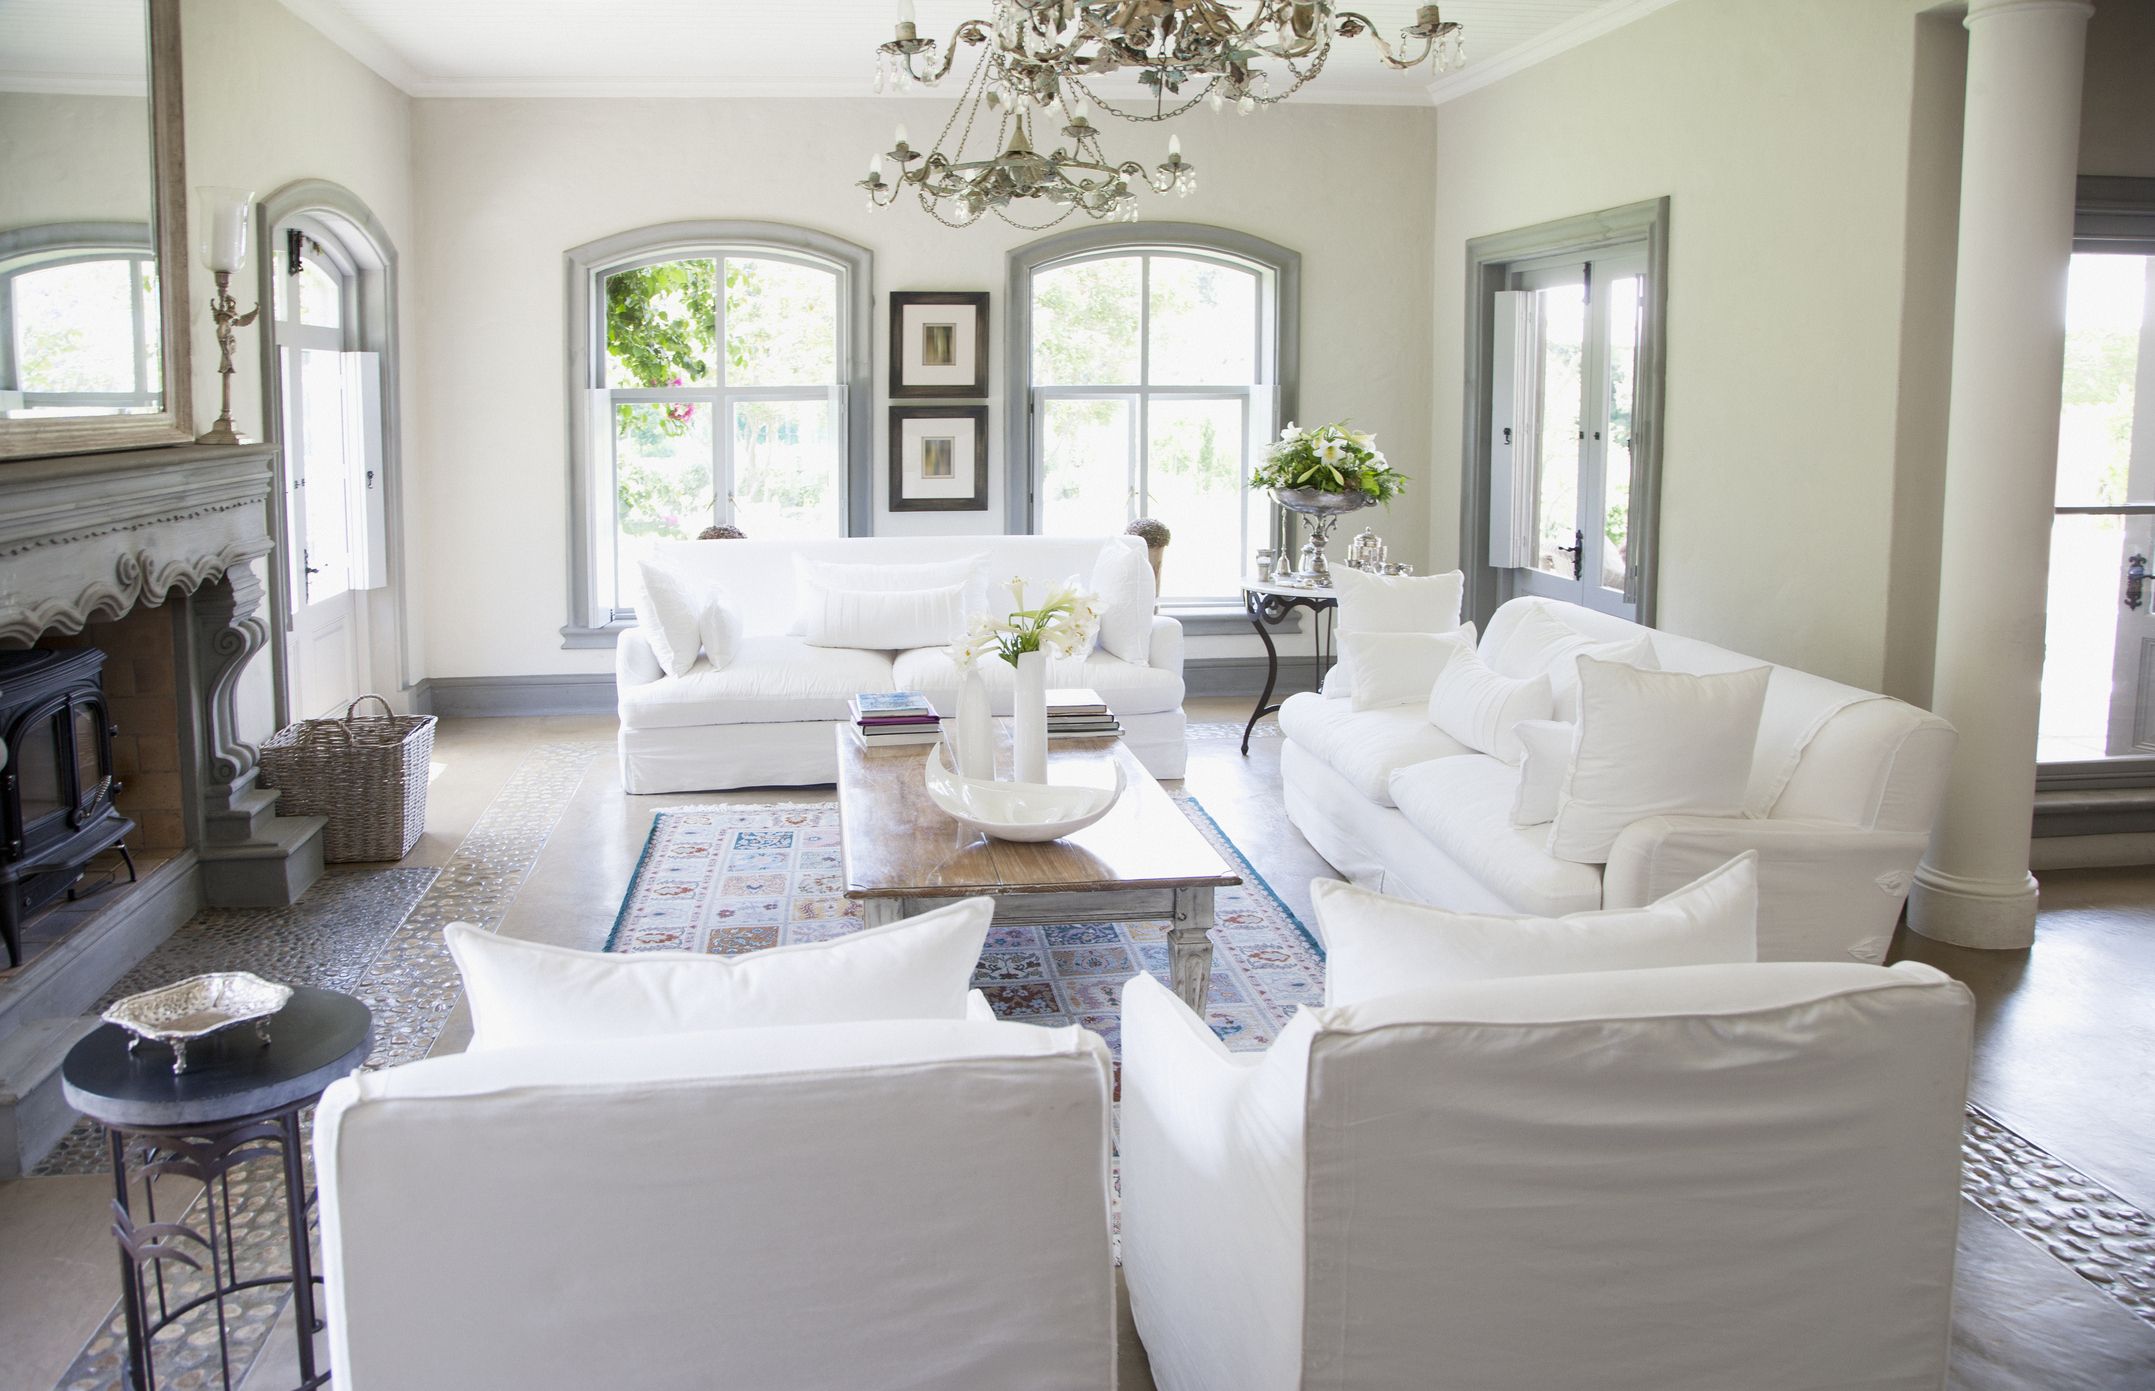 jurk inflatie Pijlpunt What No One Tells You About Owning a White Couch - The Truth About White  Furniture